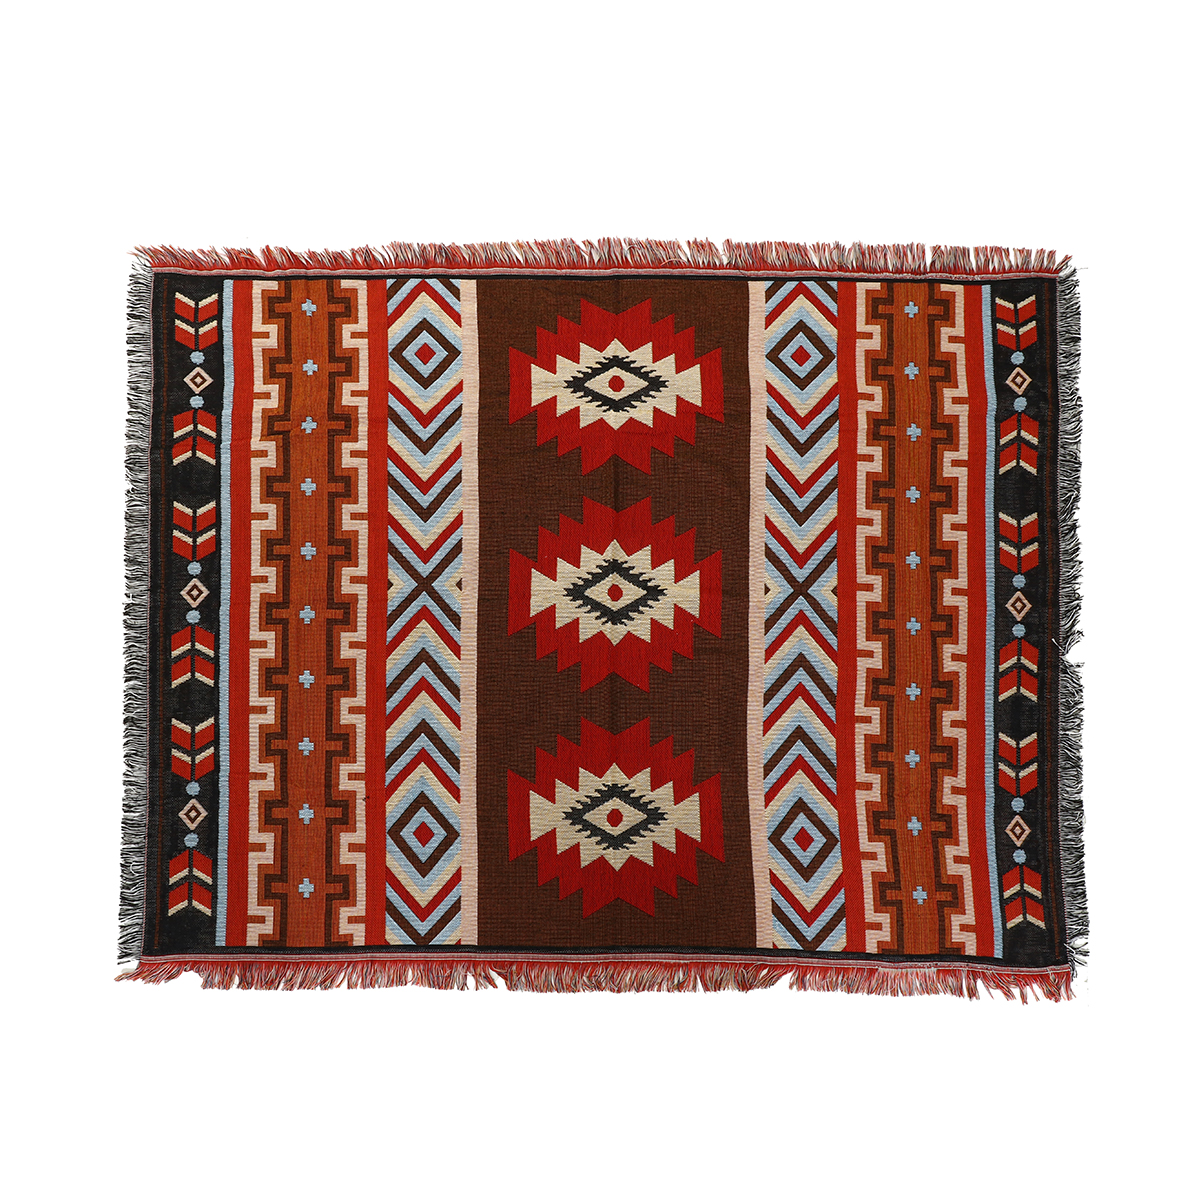 Home Decoration Aztec Navajo Towel Mat Throw Wall Hanging Cotton Rugs Geometry Woven 130*160cm—1